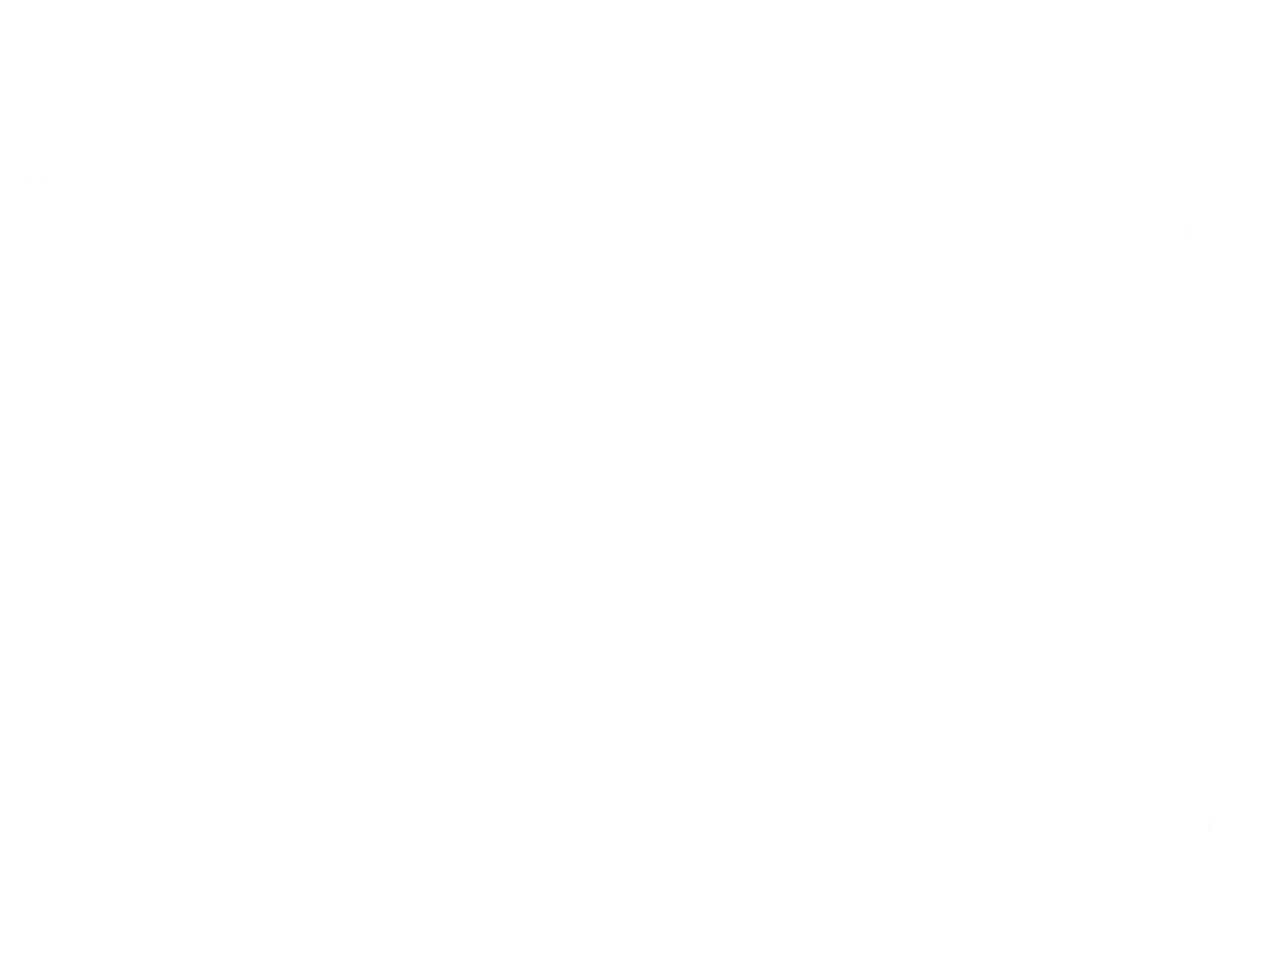 Kyle Ray Photography